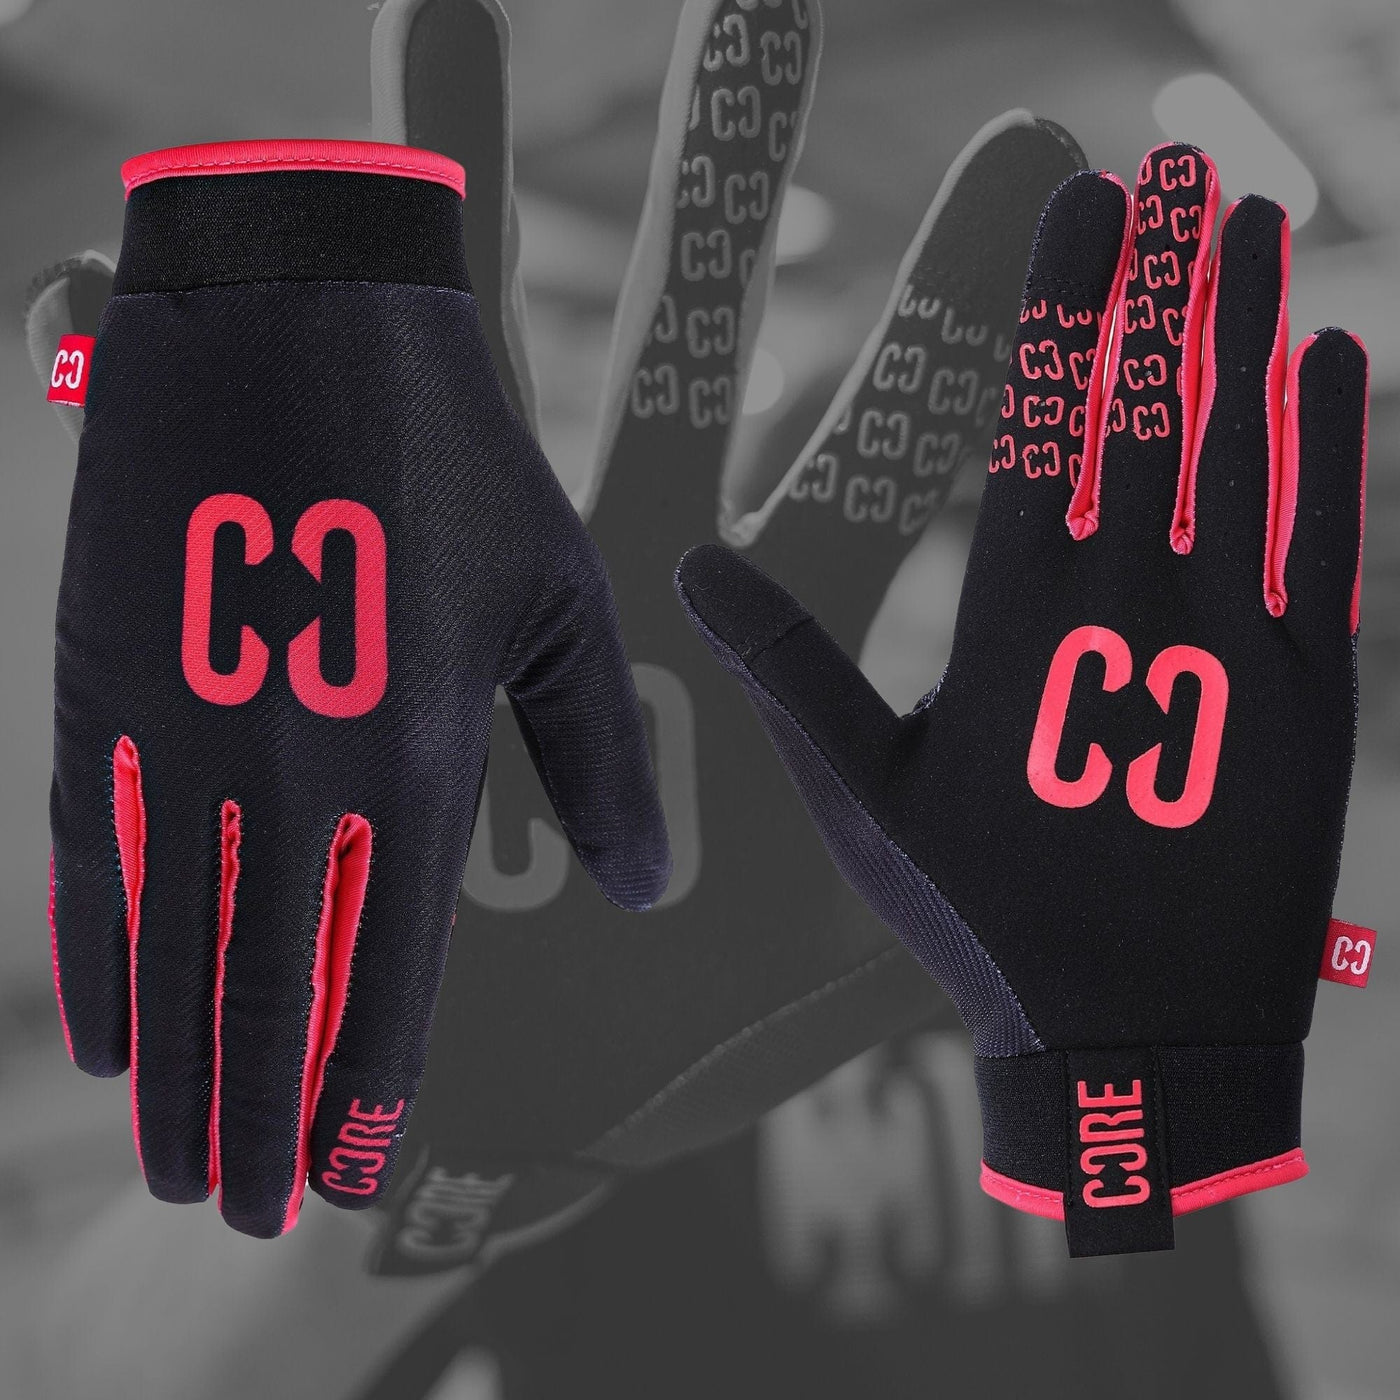 CORE Protection Aero Skateboard Gloves Accent Pink I Skateboarding Gloves Pair